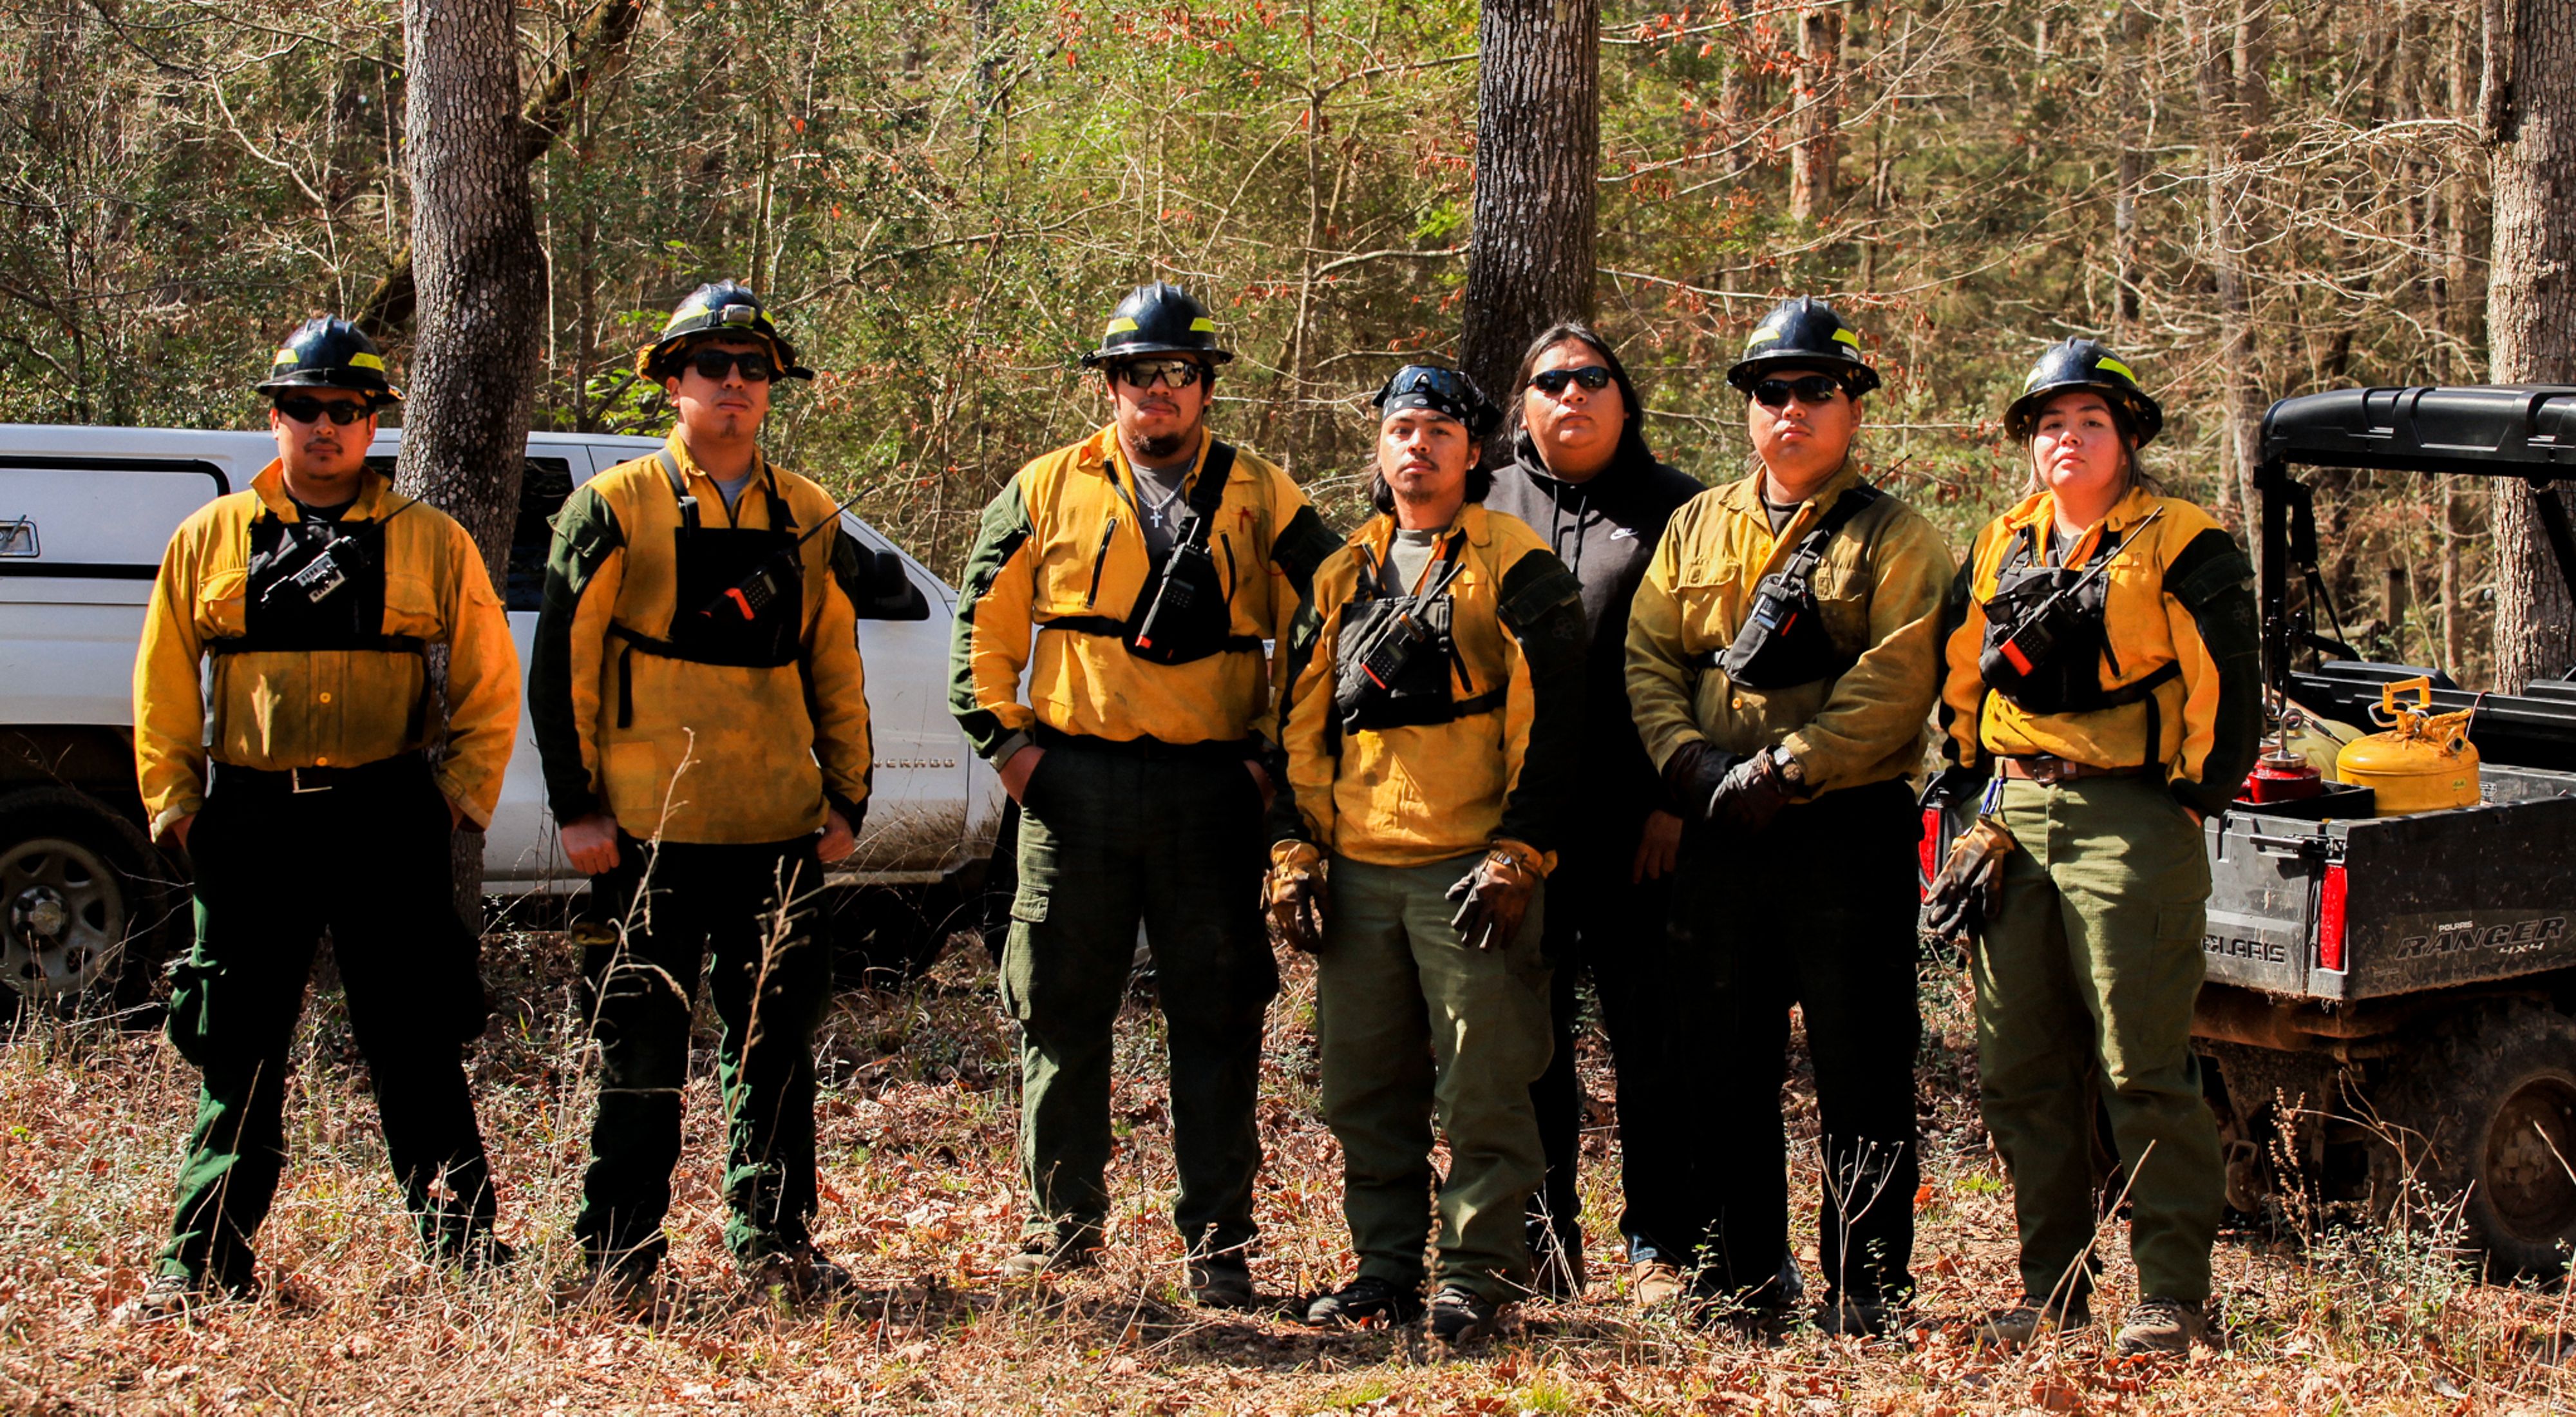 Seven members of the Alabama-Coushatta Tribe of Texas Wildland Fire Management crew stand ready in their protective gear before a prescribed burn.